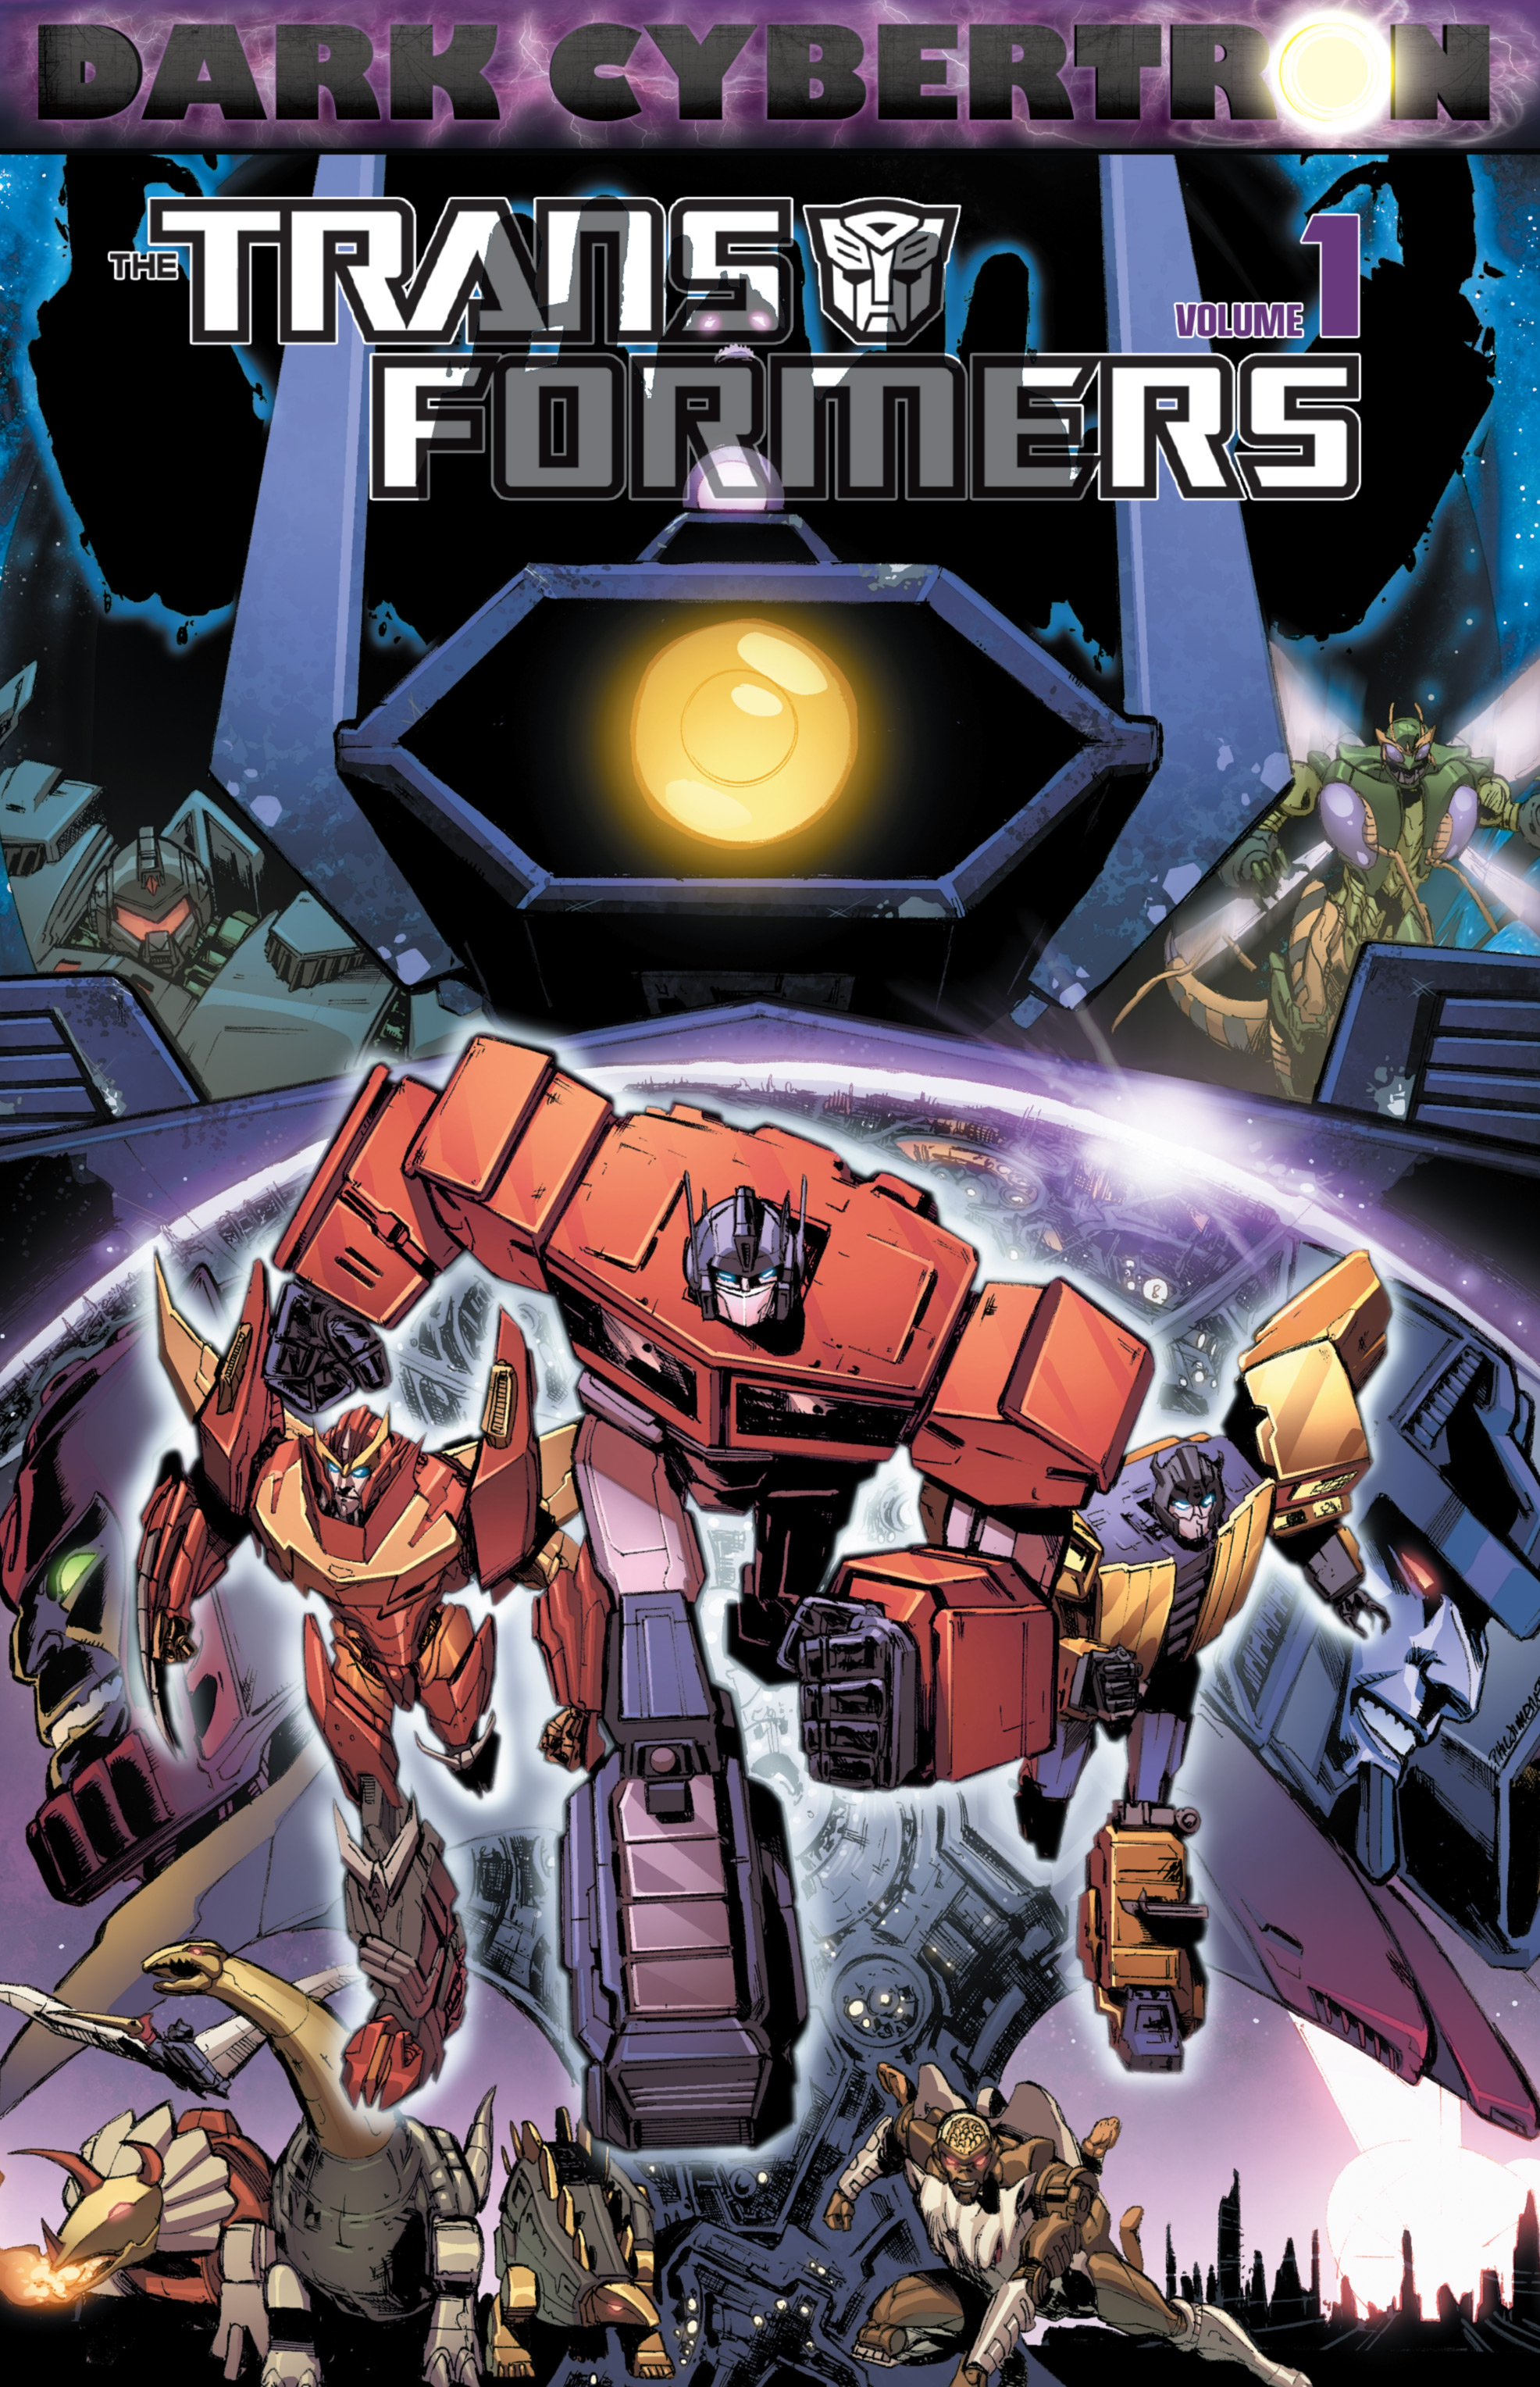 Read online The Transformers: Dark Cybertron comic -  Issue # Full - 1